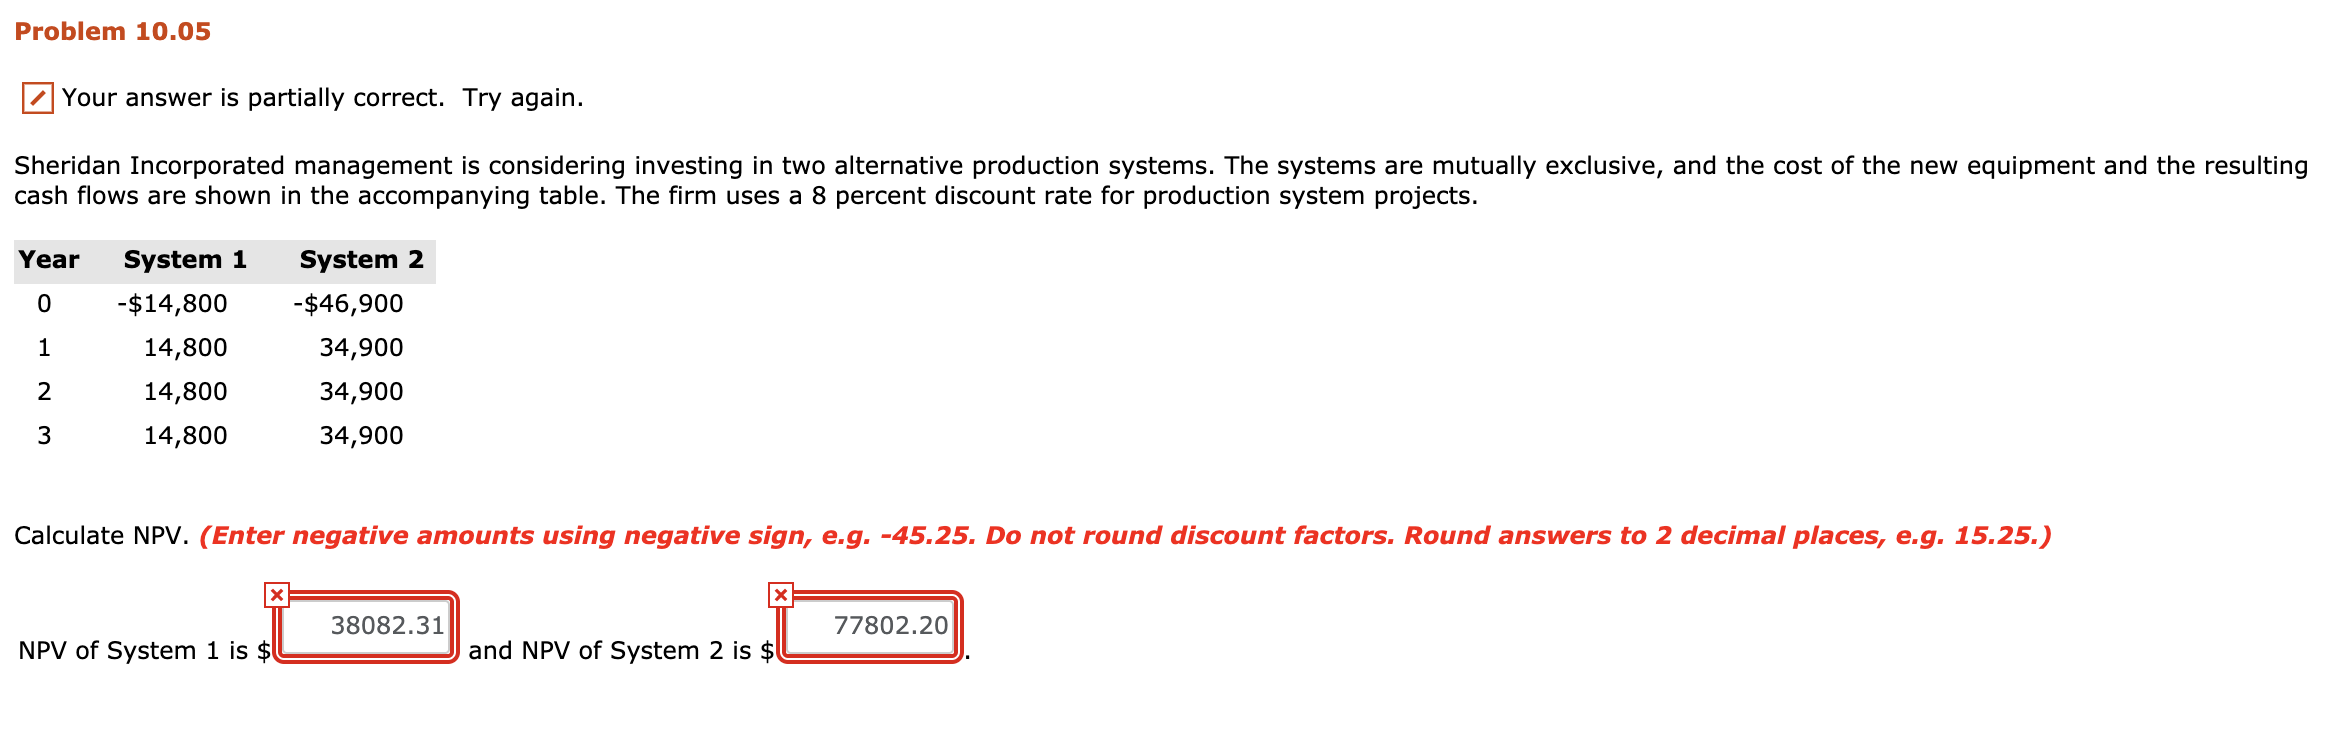 Problem 10.05
Your answer is partially correct. Try again.
Sheridan Incorporated management is considering investing in two alternative production systems. The systems are mutually exclusive, and the cost of the new equipment and the resulting
cash flows are shown in the accompanying table. The firm uses a 8 percent discount rate for production system projects.
Year
System 1
System 2
-$14,800
-$46,900
1
14,800
34,900
2
14,800
34,900
14,800
34,900
Calculate NPV. (Enter negative amounts using negative sign, e.g. -45.25. Do not round discount factors. Round answers to 2 decimal places, e.g. 15.25.)
38082.31
77802.20
NPV of System 1 is $
and NPV of System 2 is $
